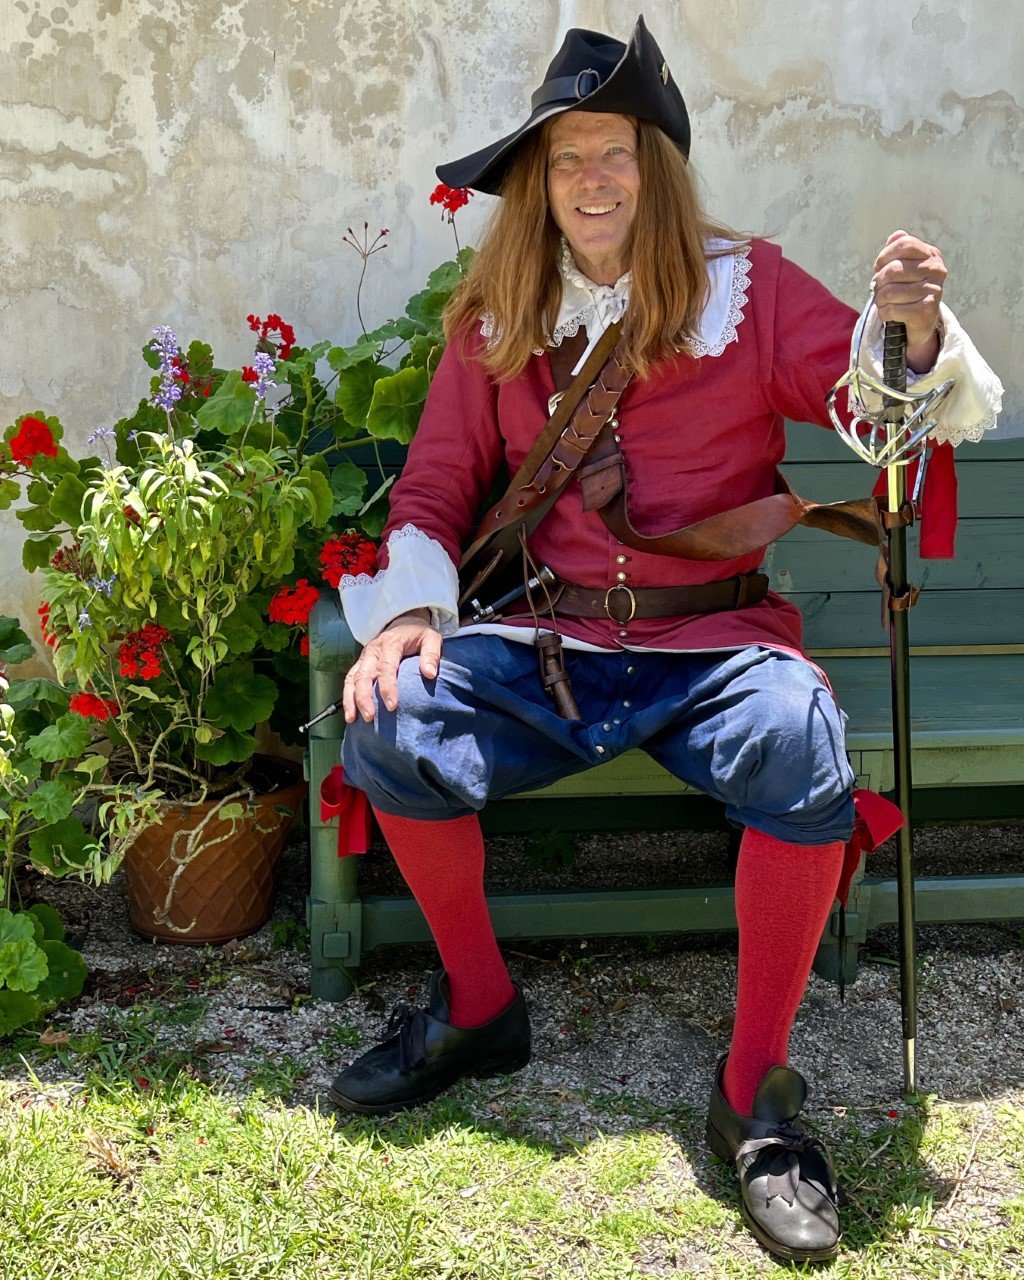 Jeff Jore is dressed as a Spanish soldier (musketeer) from the mid-17th century.